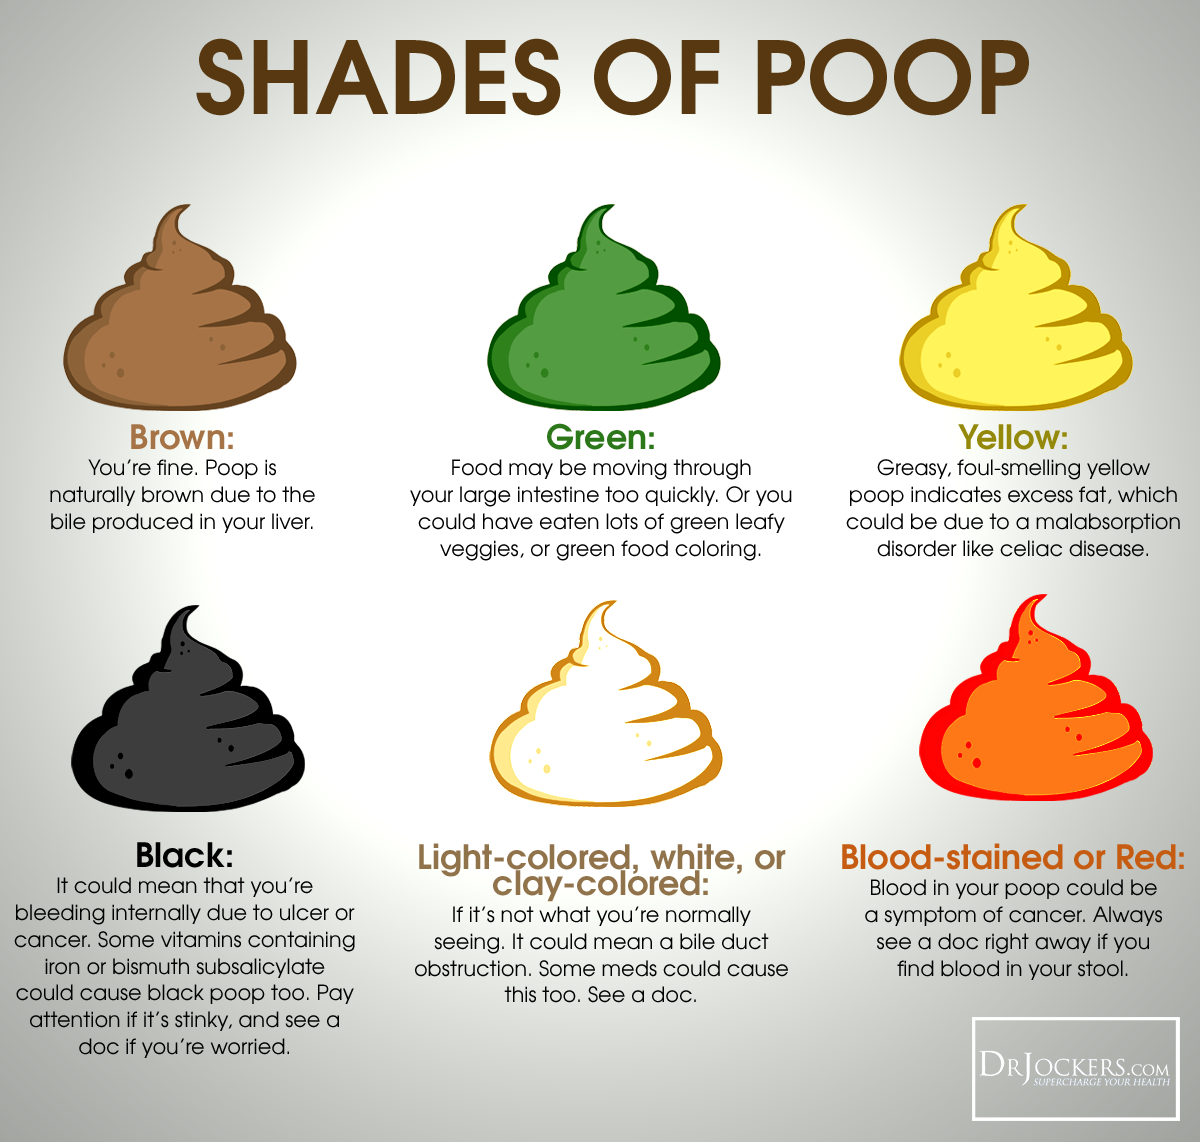 16 Ways to Achieve a Healthy Poop!